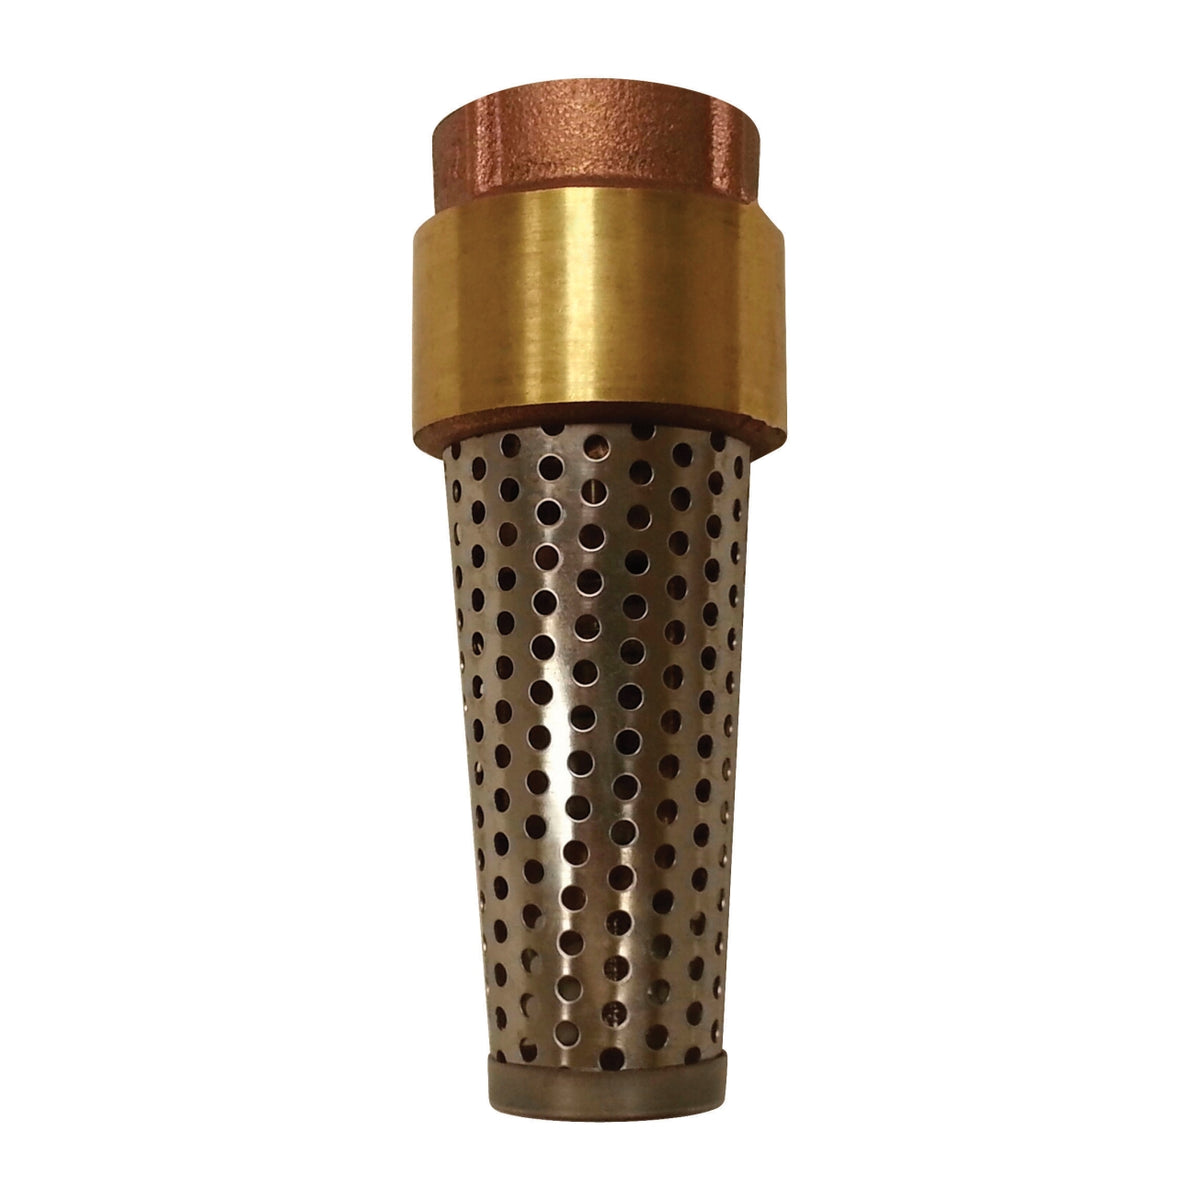 Buy campbell foot valve - Online store for rough plumbing supplies, foot  in USA, on sale, low price, discount deals, coupon code